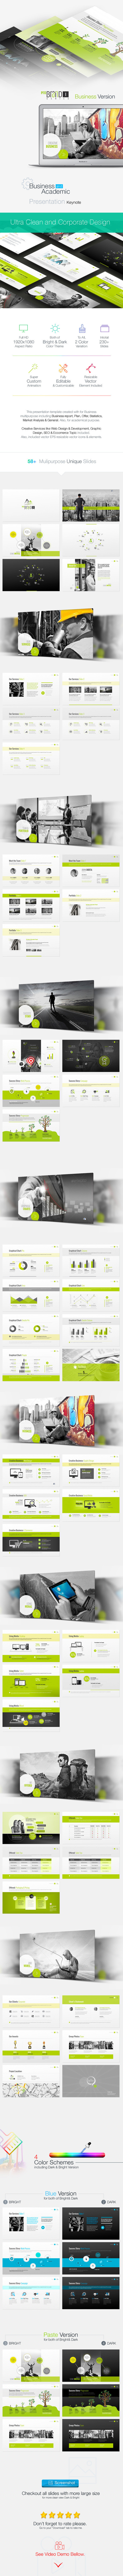 Graphicriver best powerpoint keynote presentation template business plan and growth general clean creative simple design ip